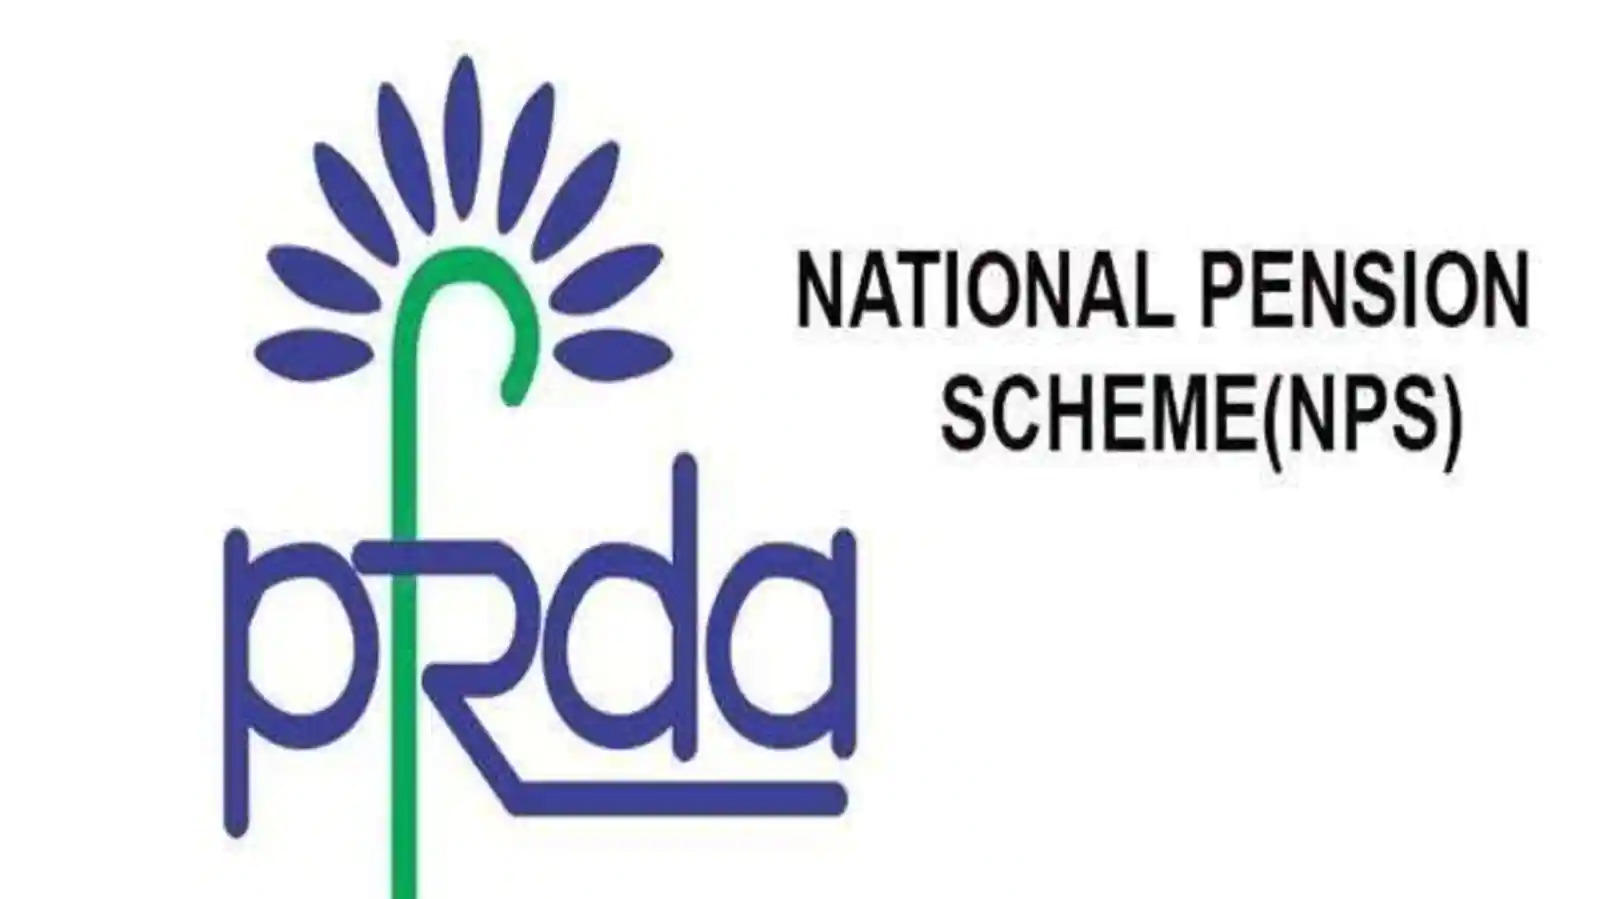 PFRDA and Irdai granted licence to FinMapp to sell NPS, insurance